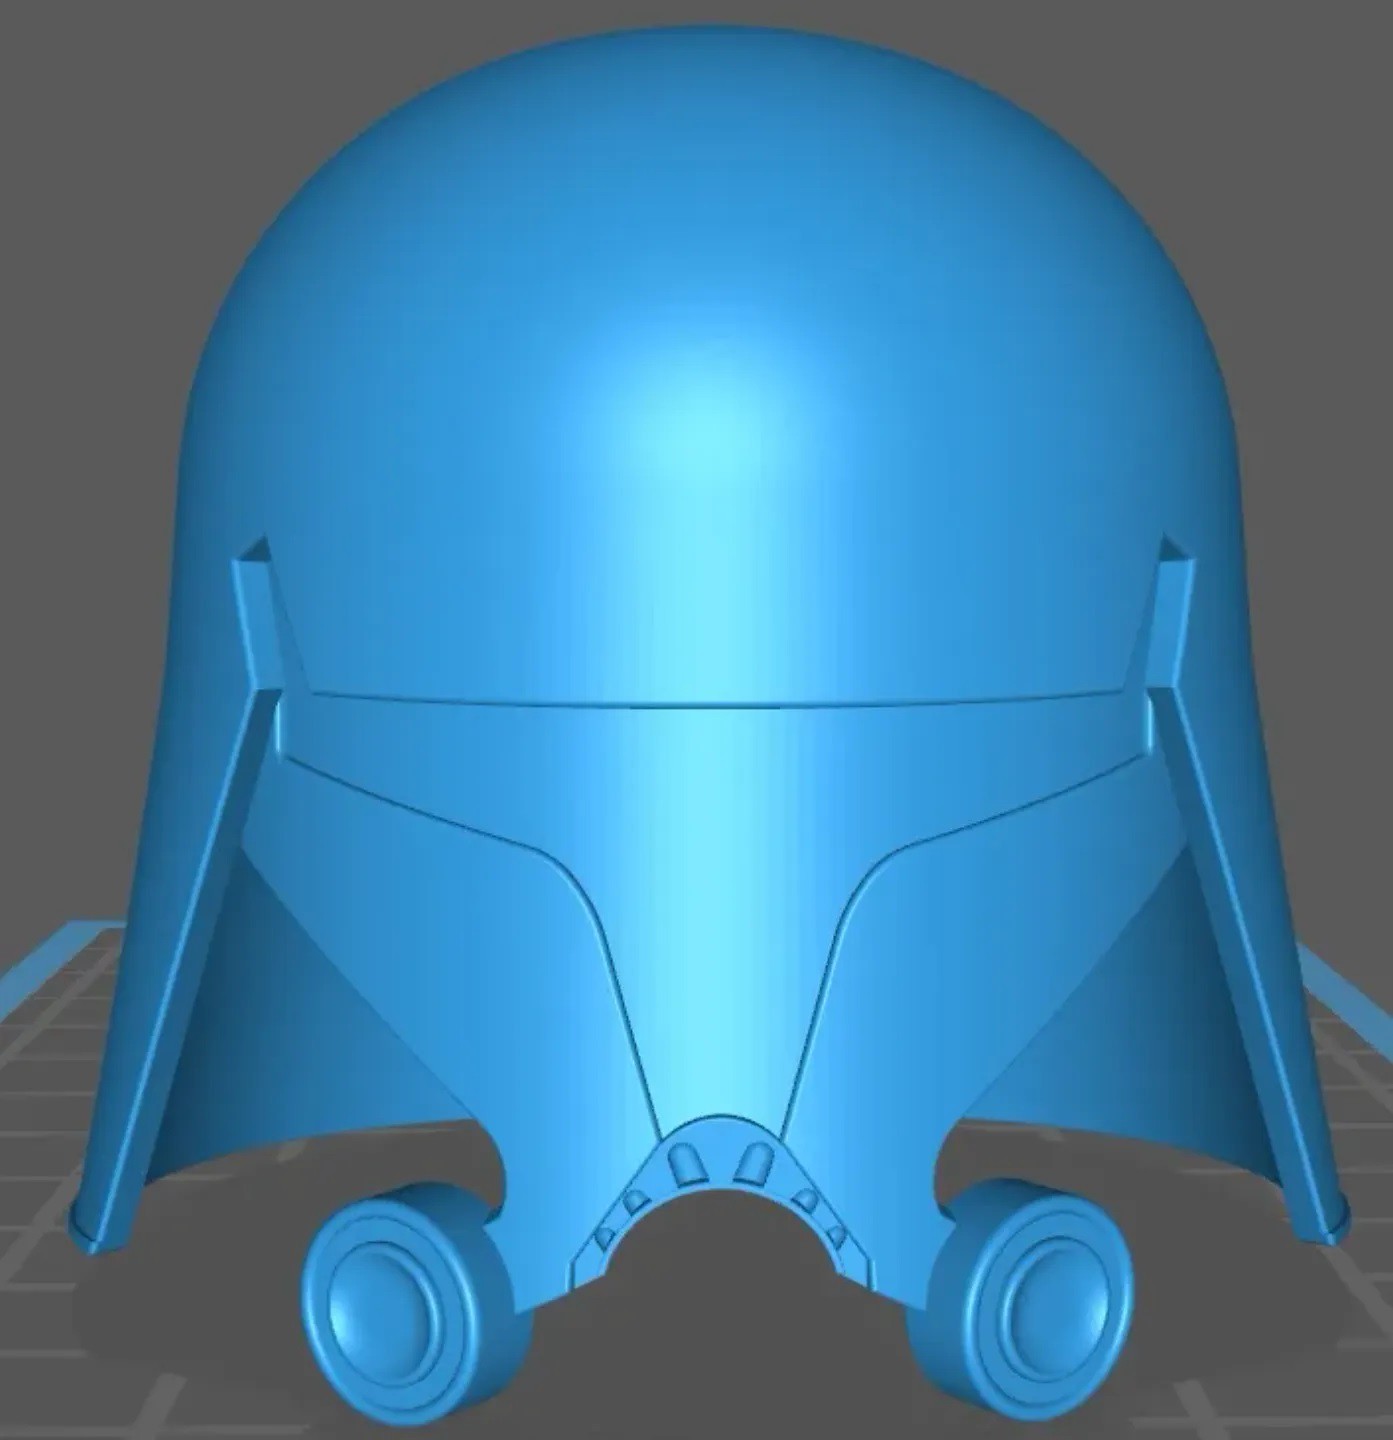 3D printable Star Wars parts and weapons for 1:6 figures (New models added, more updates in future) - Page 3 52702488296_abaabefb63_h